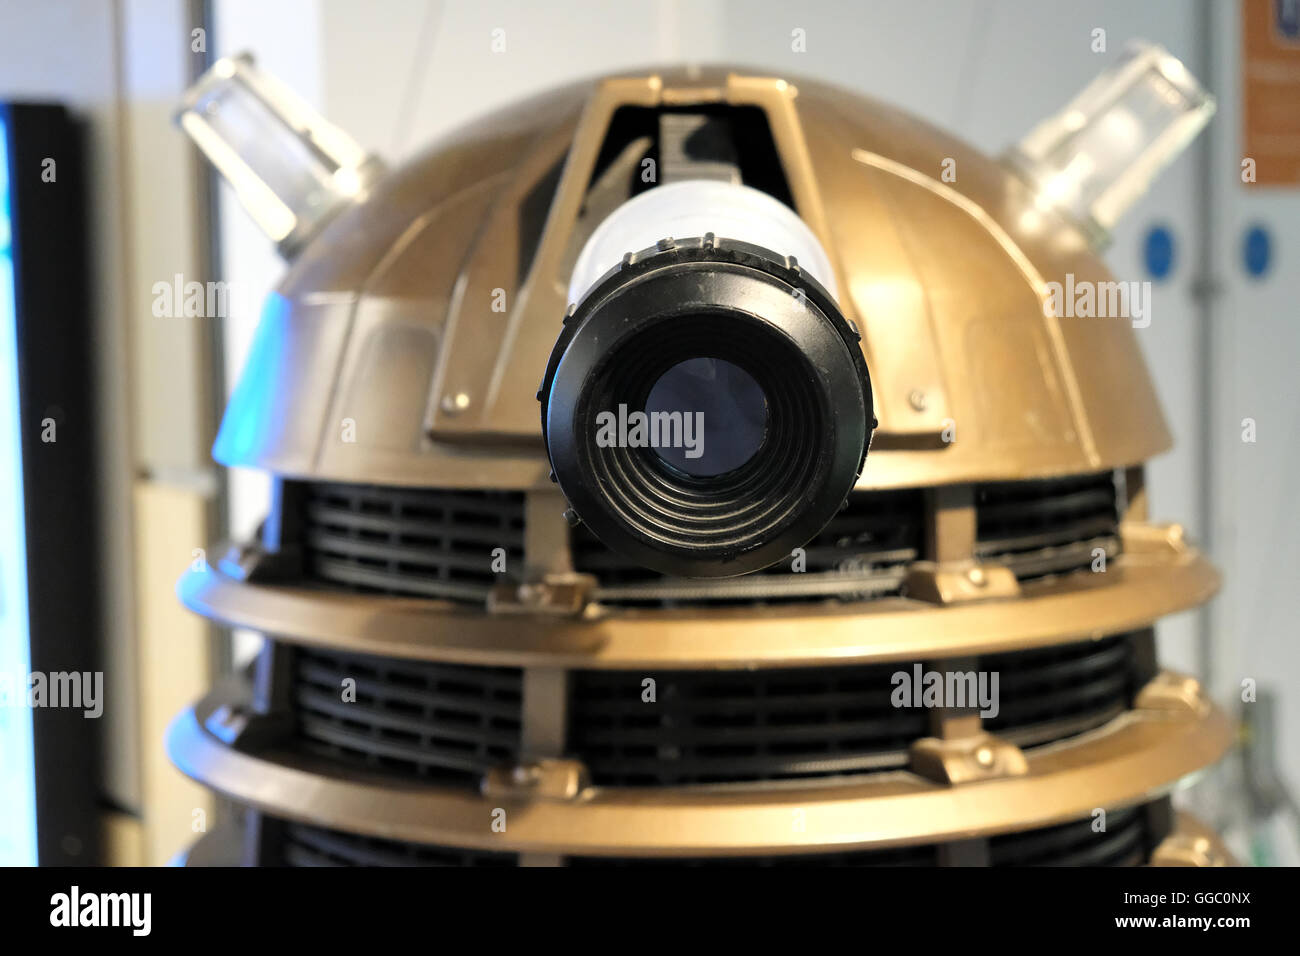 A top of a gold Dalek looking staright at the camera Stock Photo